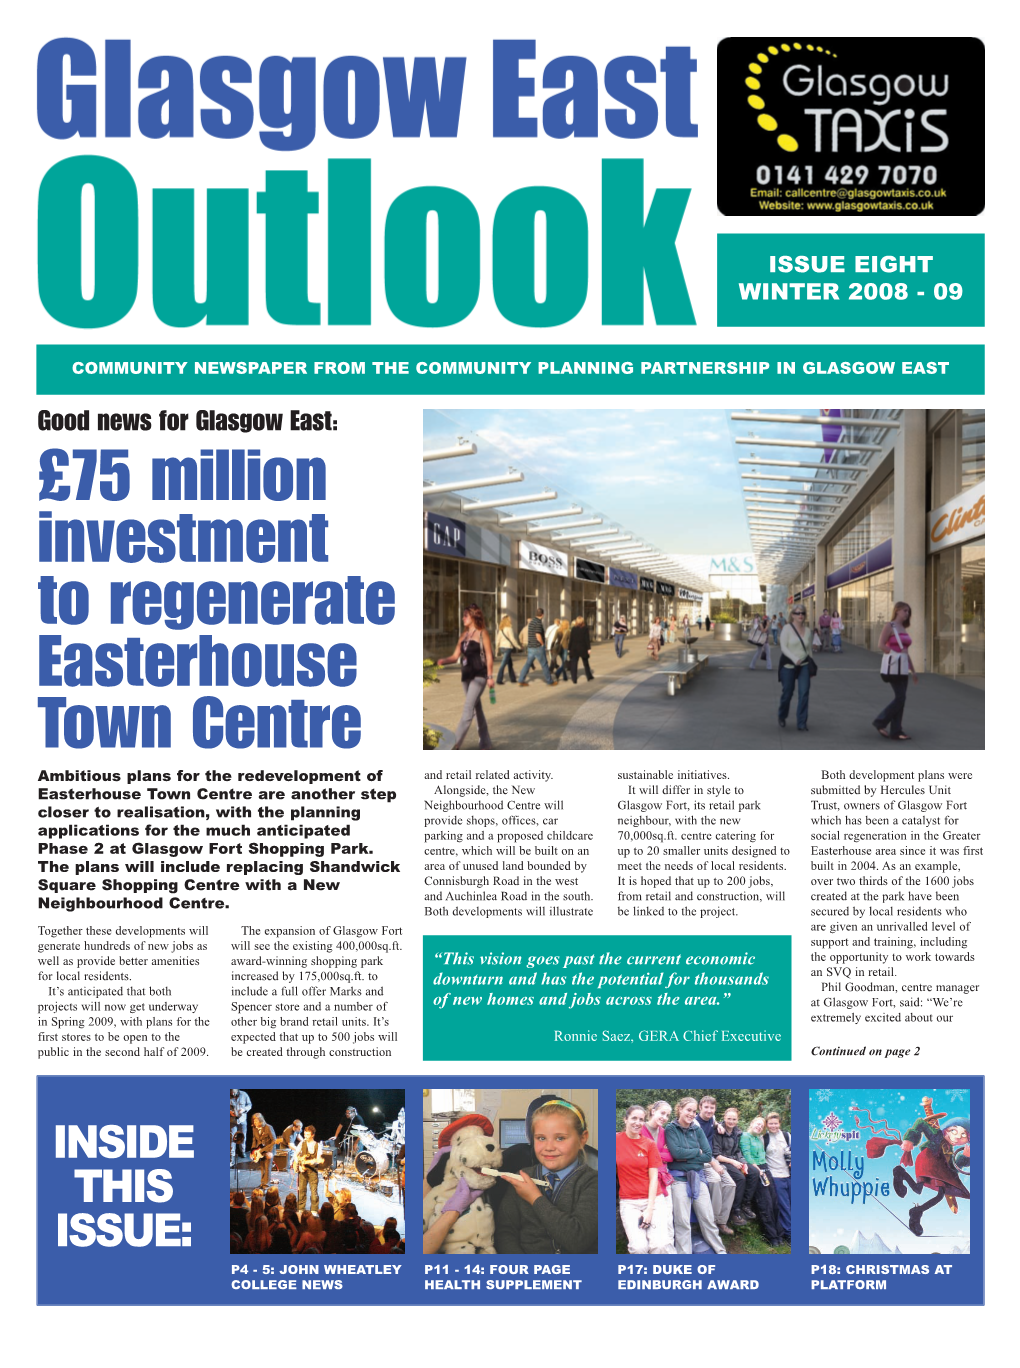 £75 Million Investment to Regenerate Easterhouse Town Centre Ambitious Plans for the Redevelopment of and Retail Related Activity